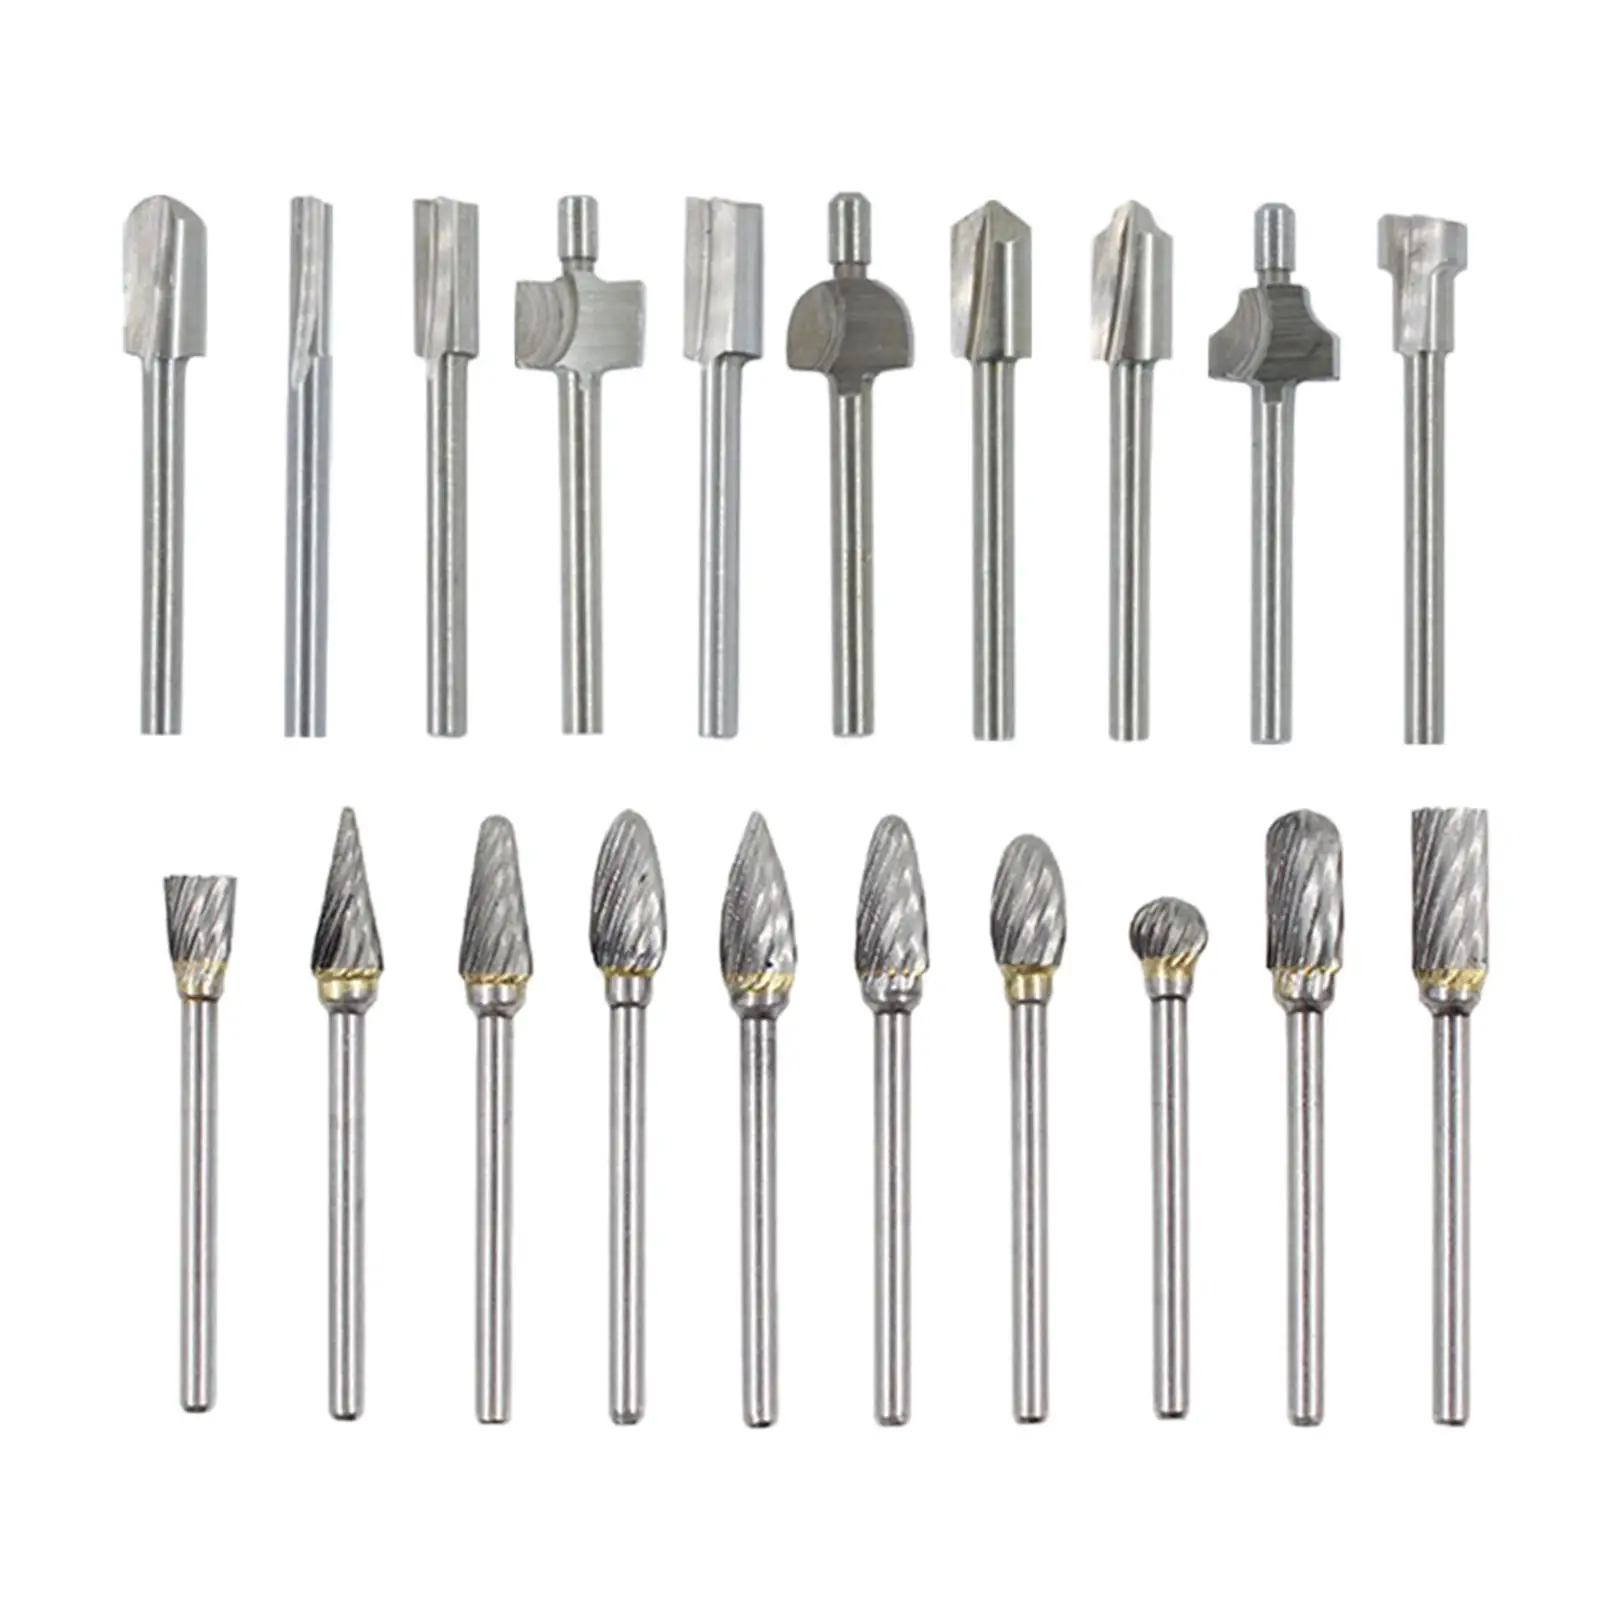 20 Pieces Tungsten Steel Rotary Drill Set, Cutting Burr Bit Polishing Rotary Tools for Drilling Steel and Wood Working Engraving